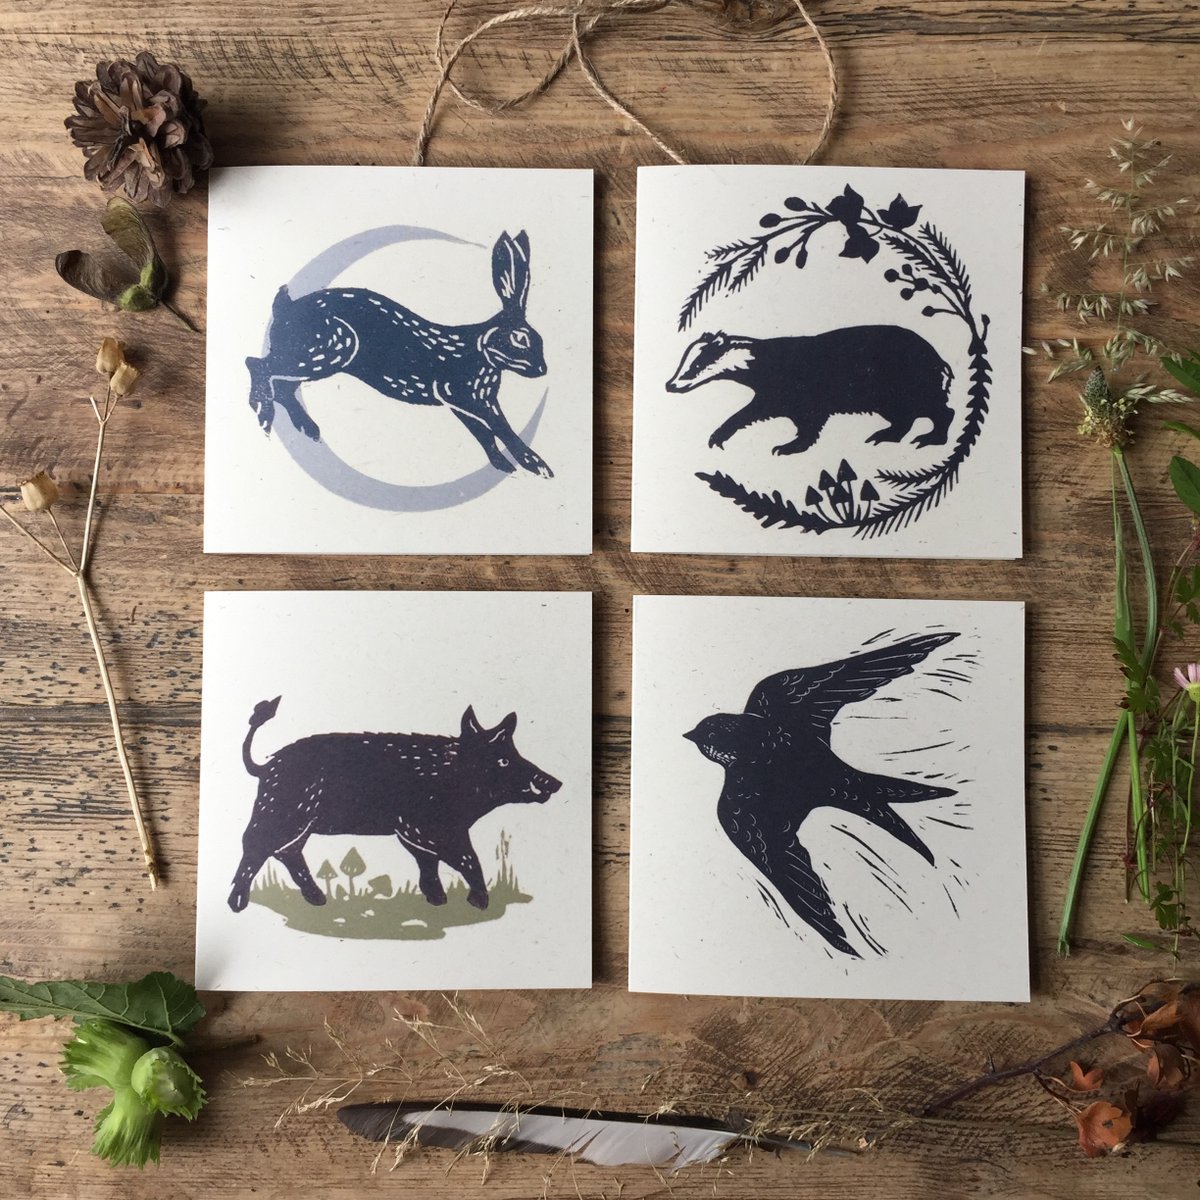 A lovely quality pack of little greeting cards makes a really thoughtful gift idea. These would be great for a nature lover.
#shopsmall #handmadehour #CraftBizParty #letterboxgifts #UKGiftHour #giftideas  

sarahrobinsondesigns.etsy.com/listing/152354…